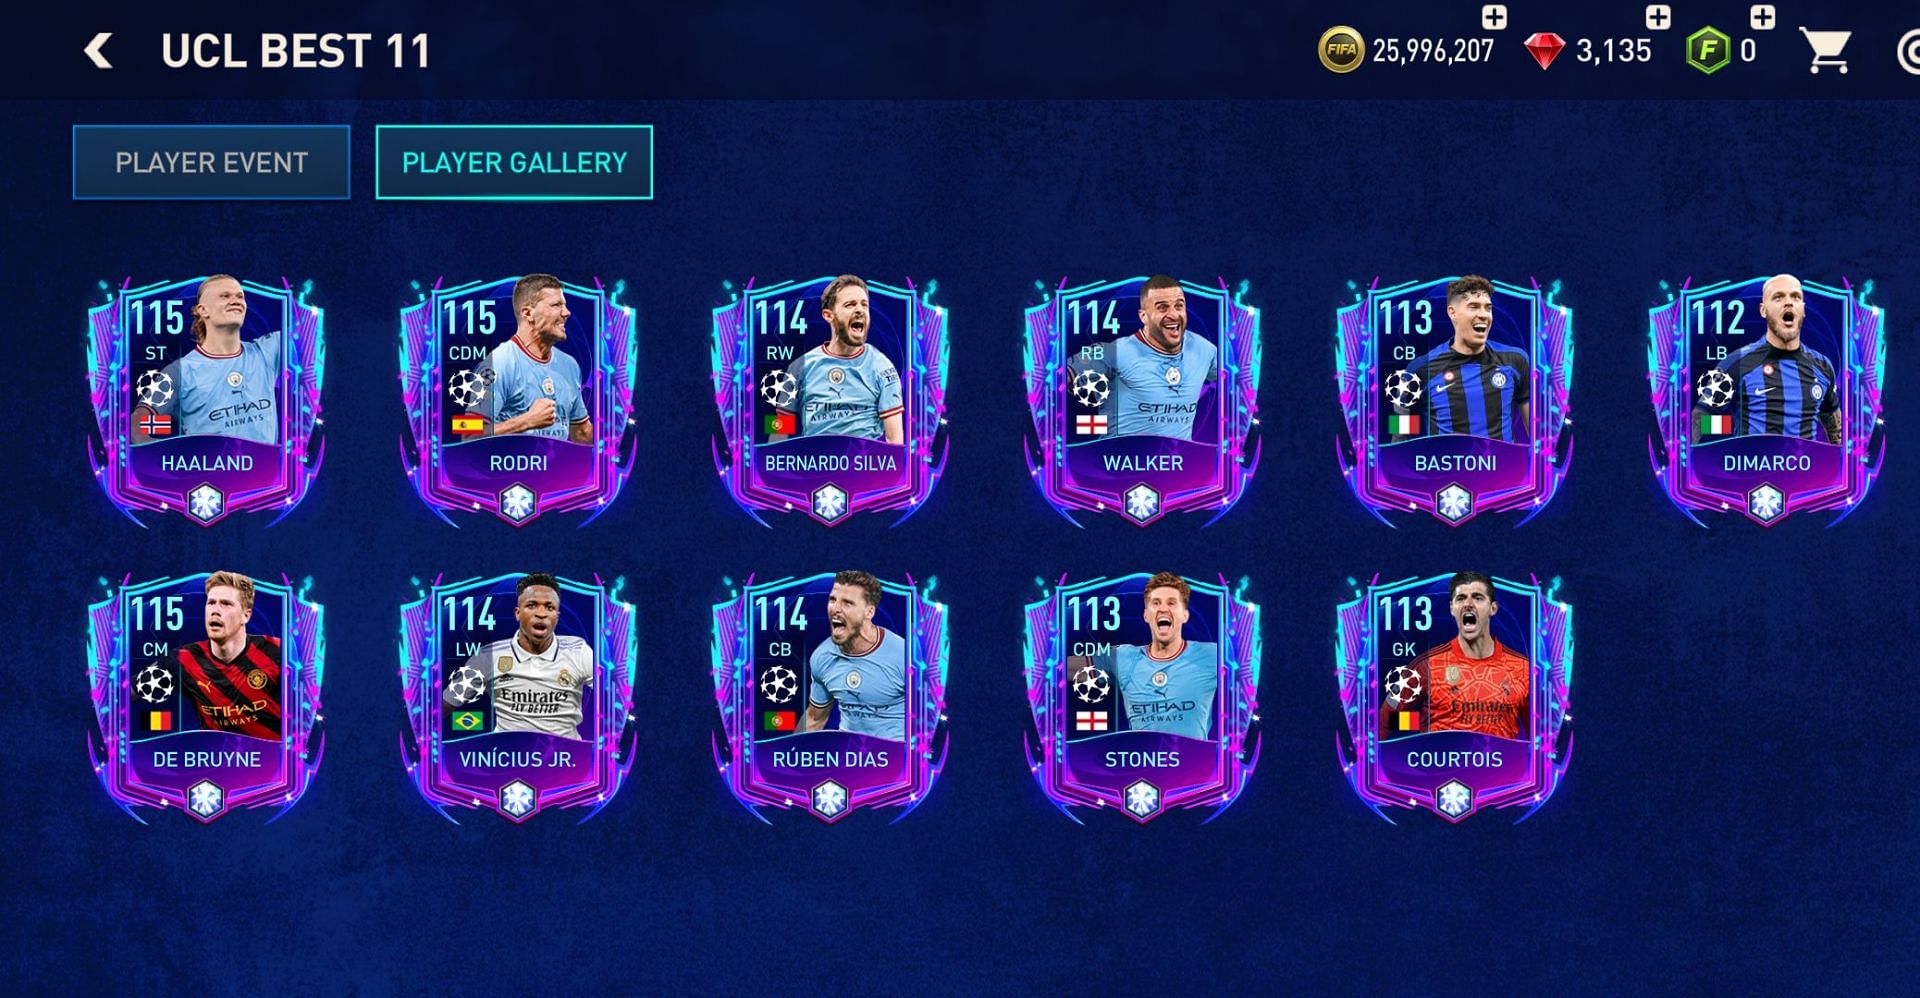 FIFA Mobile Release Special FUT Champions League Cards